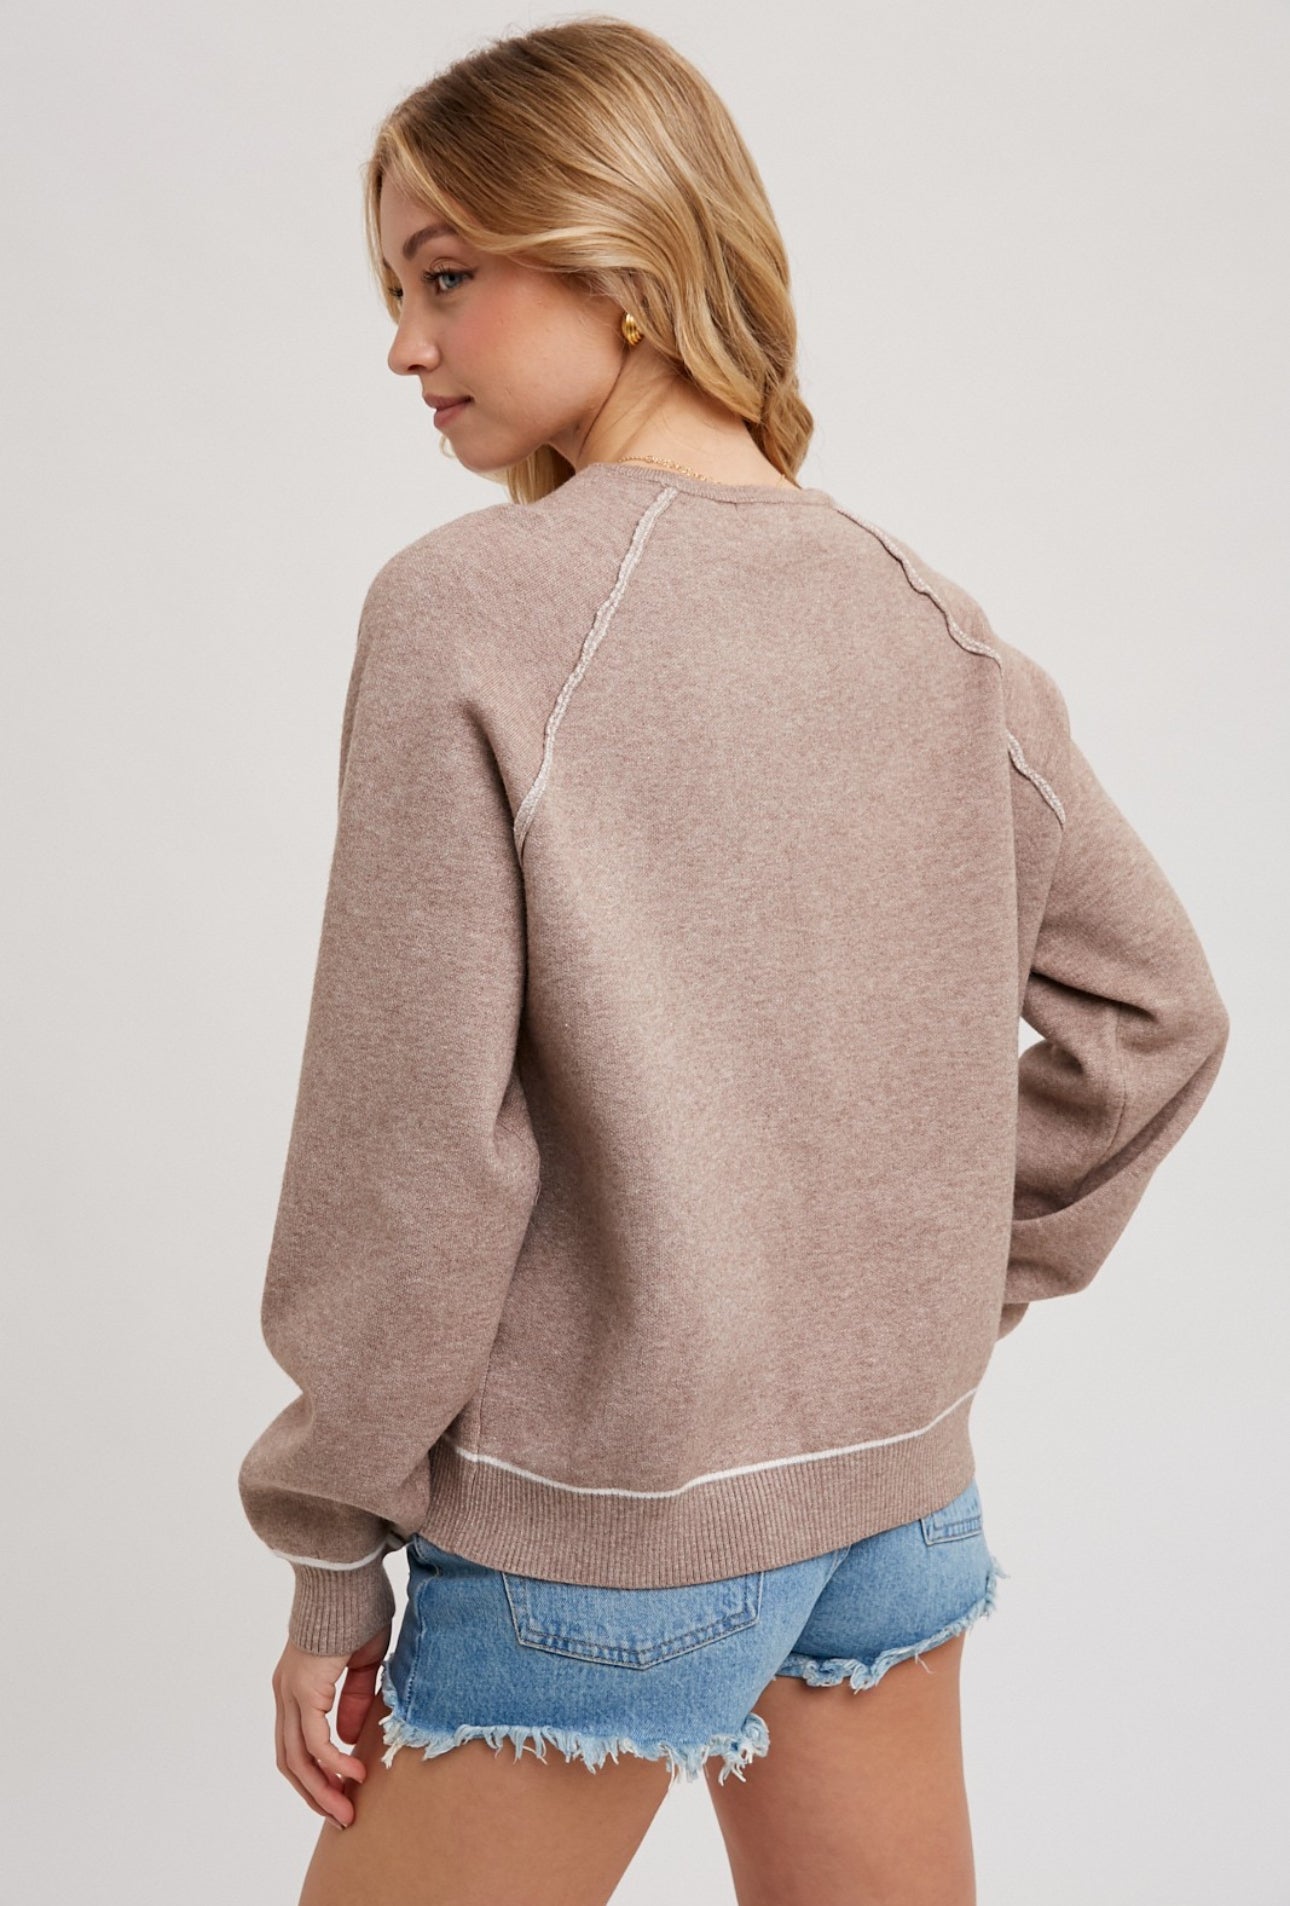 French Terry knit pullover